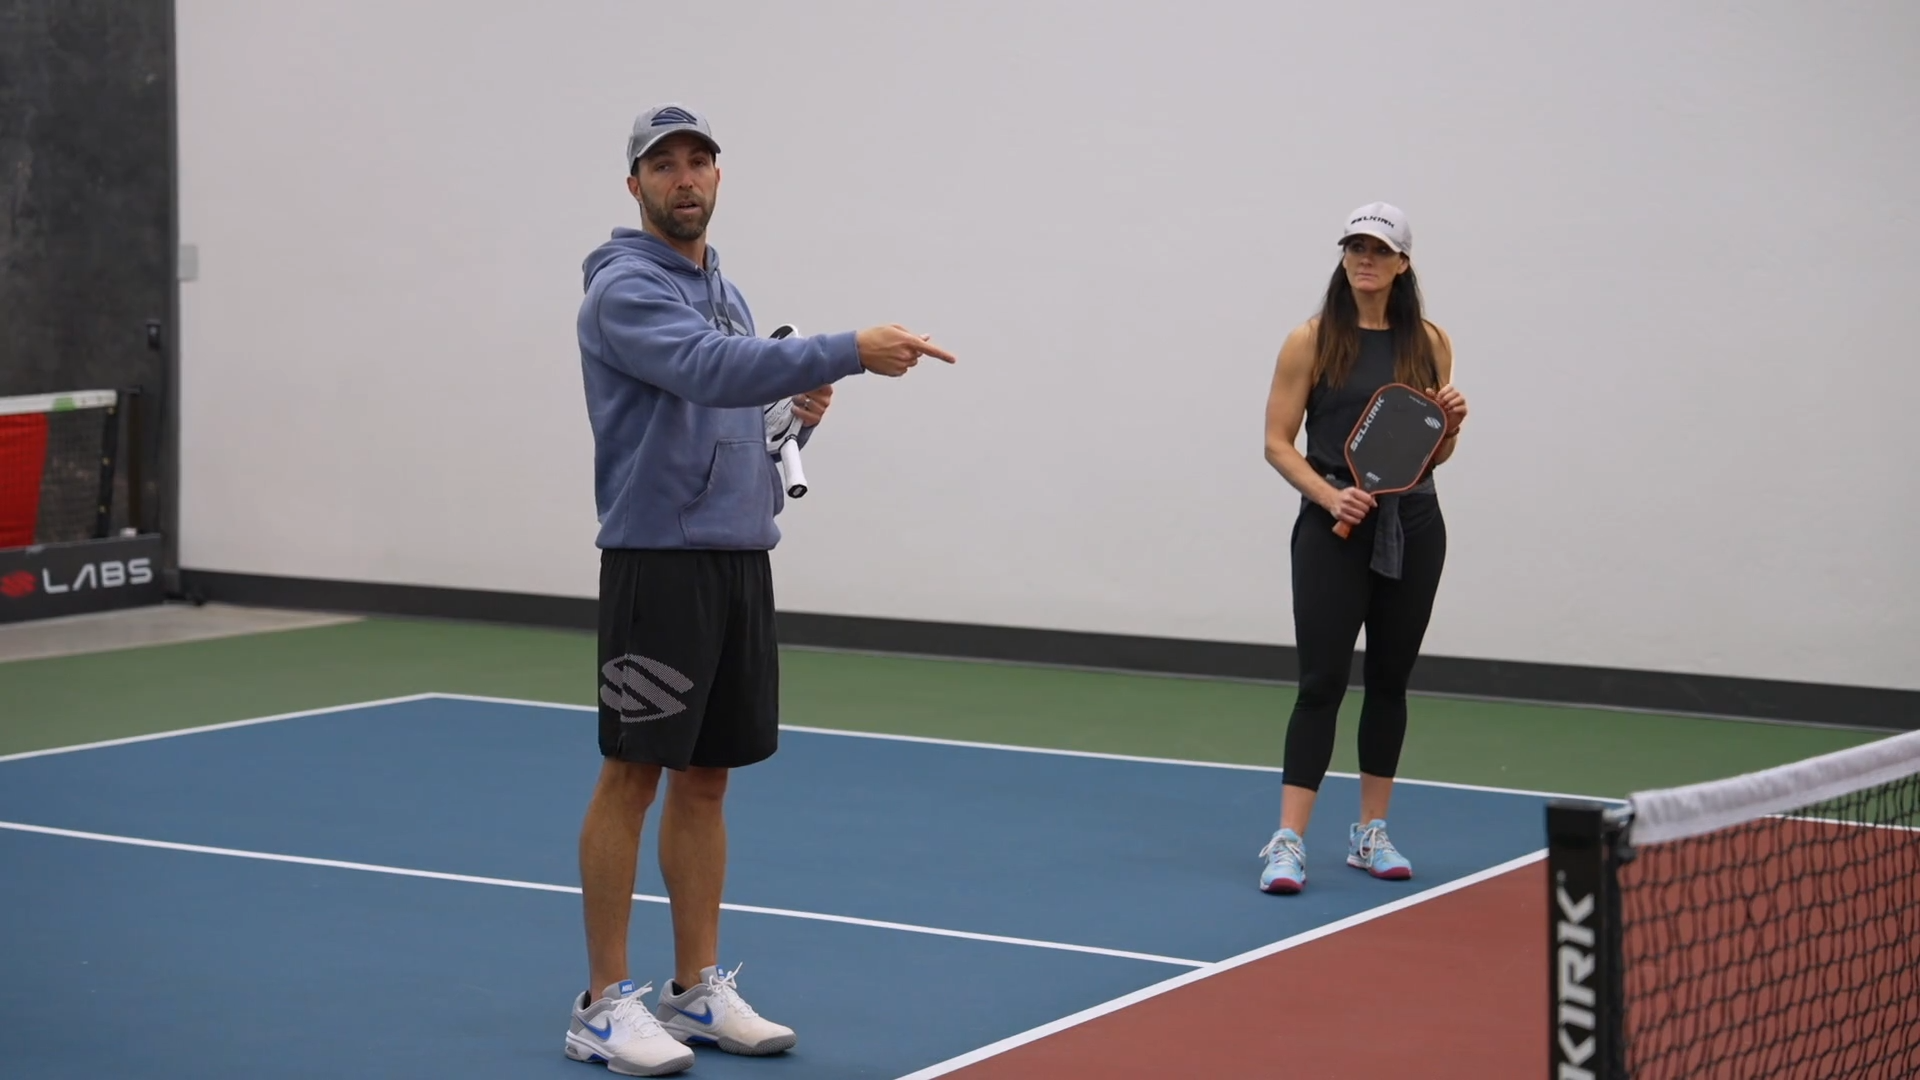 Daniel J Howard stands on an indoor pickleball court with his arm outstretched. He is teaching a woman, who stands on the same side of the court, a new pickleball skill.